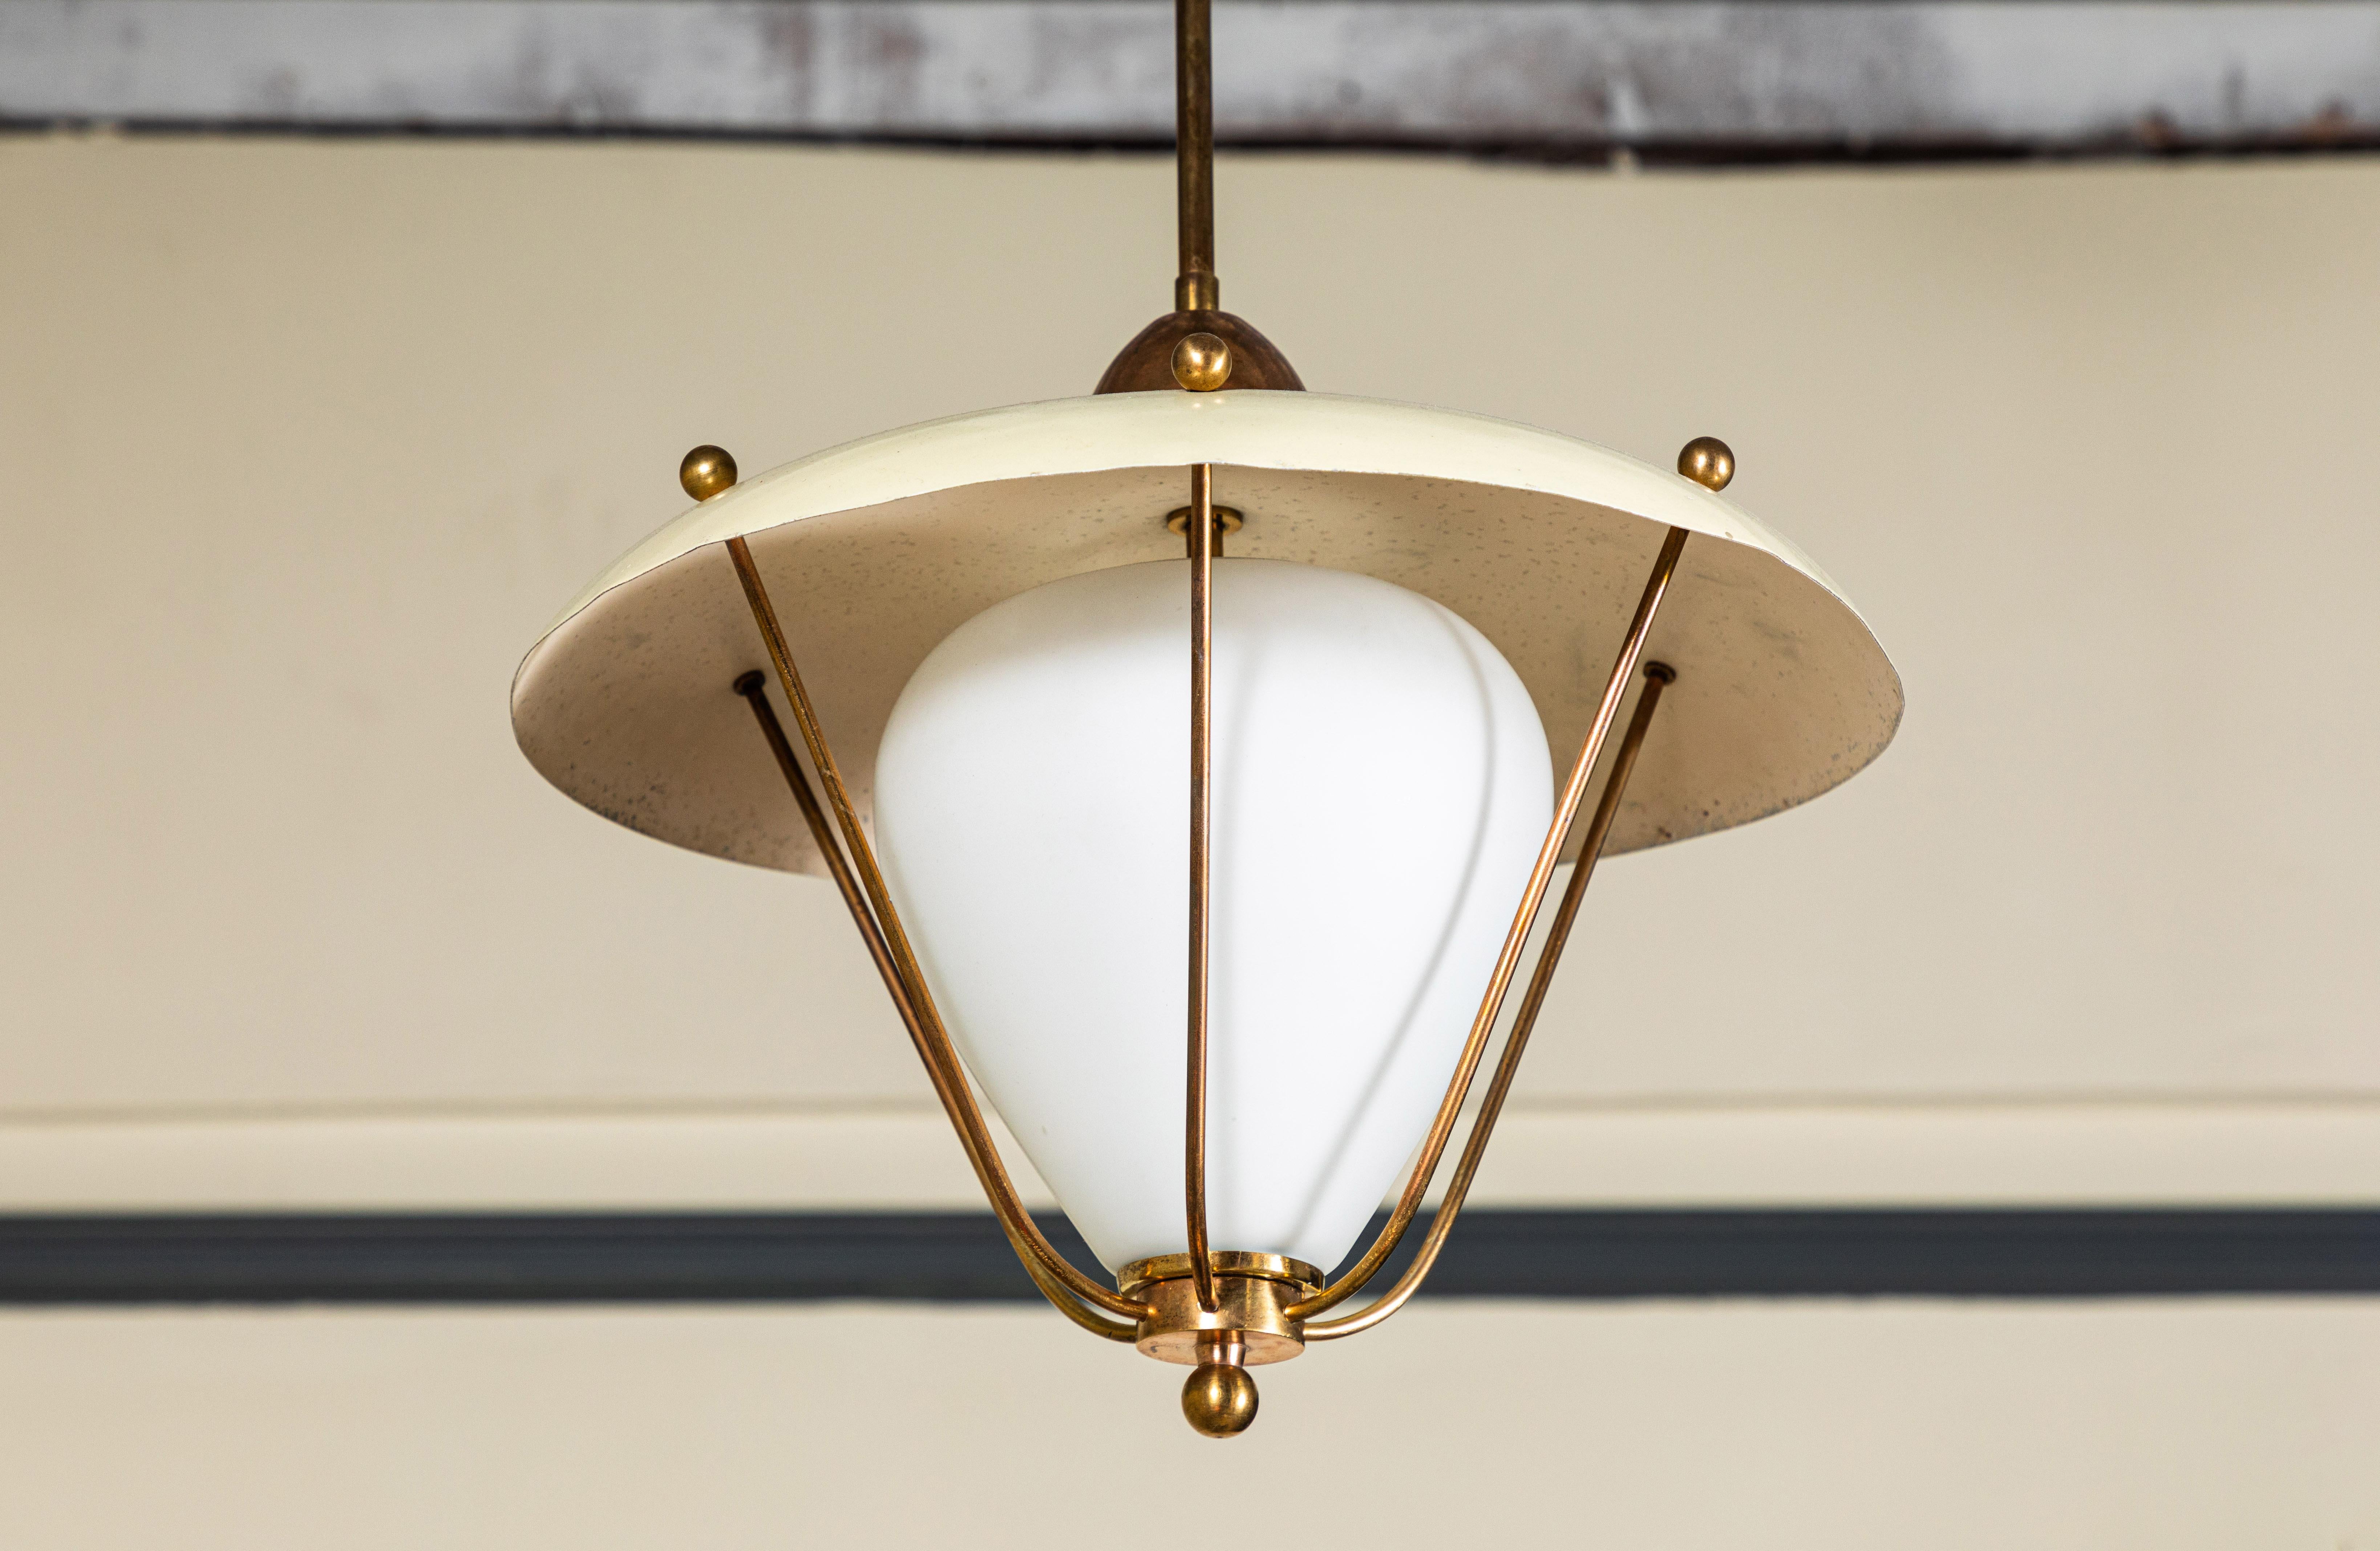 French pendant with beautiful cream colored metal shade with brass details. Simple glass globe adds an elegant detail.

   